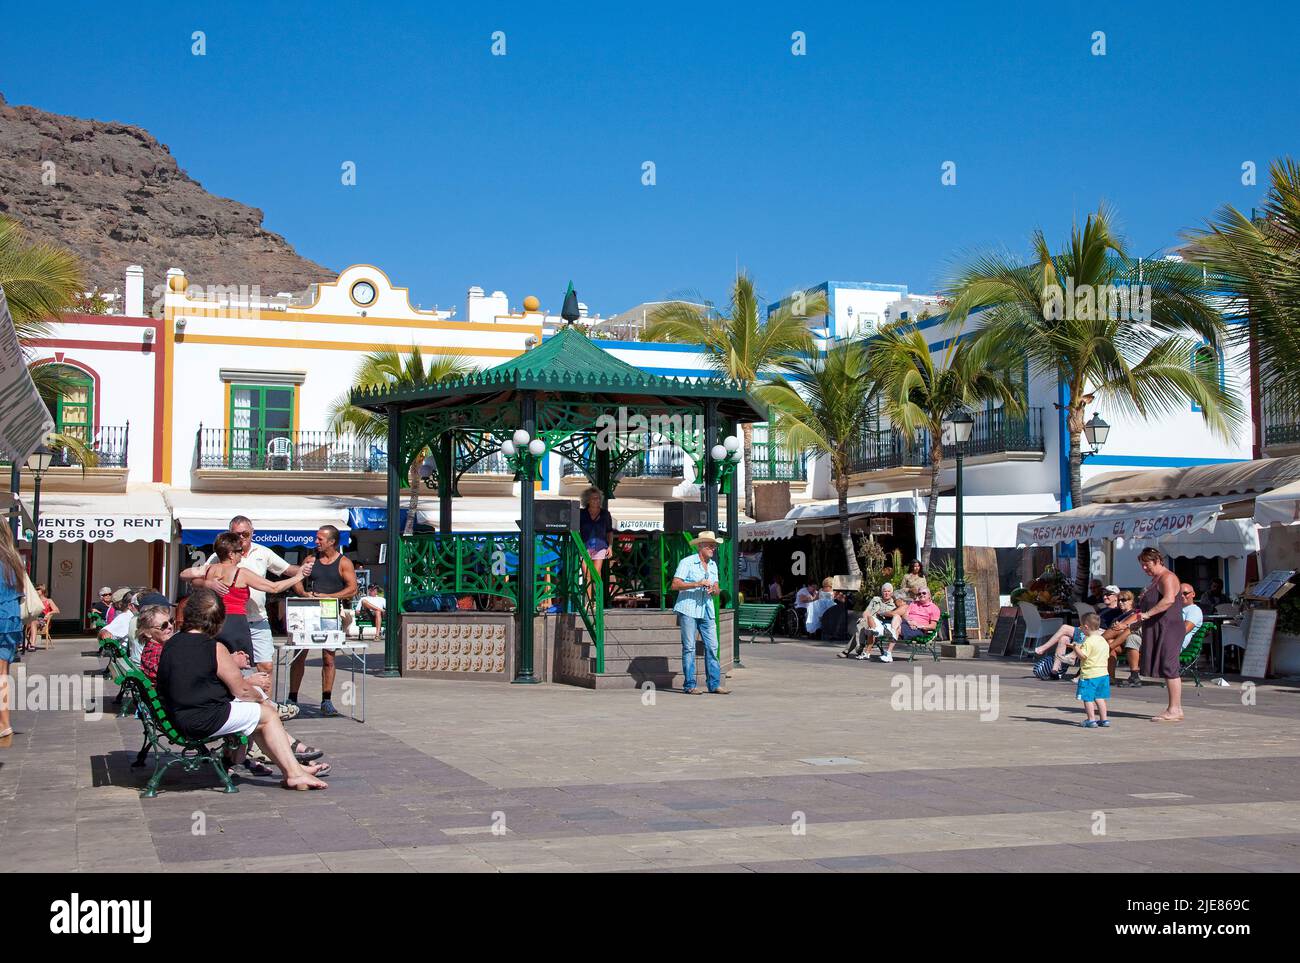 Central place with pavillon at the harbour of Puerto de Mogan, Grand Canary, Canary islands, Spain, Europe Stock Photo